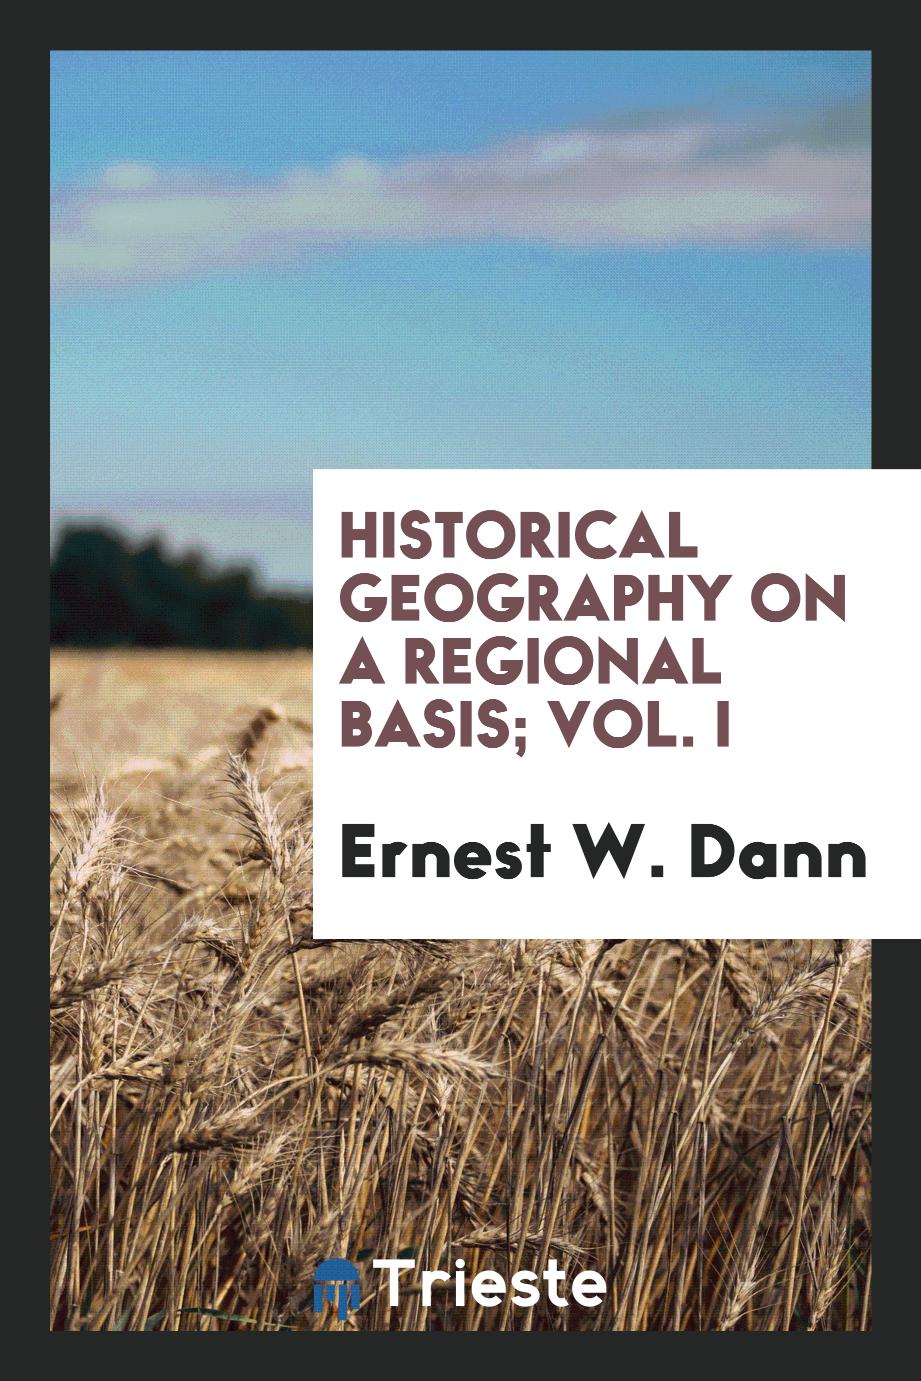 Historical geography on a regional basis; Vol. I